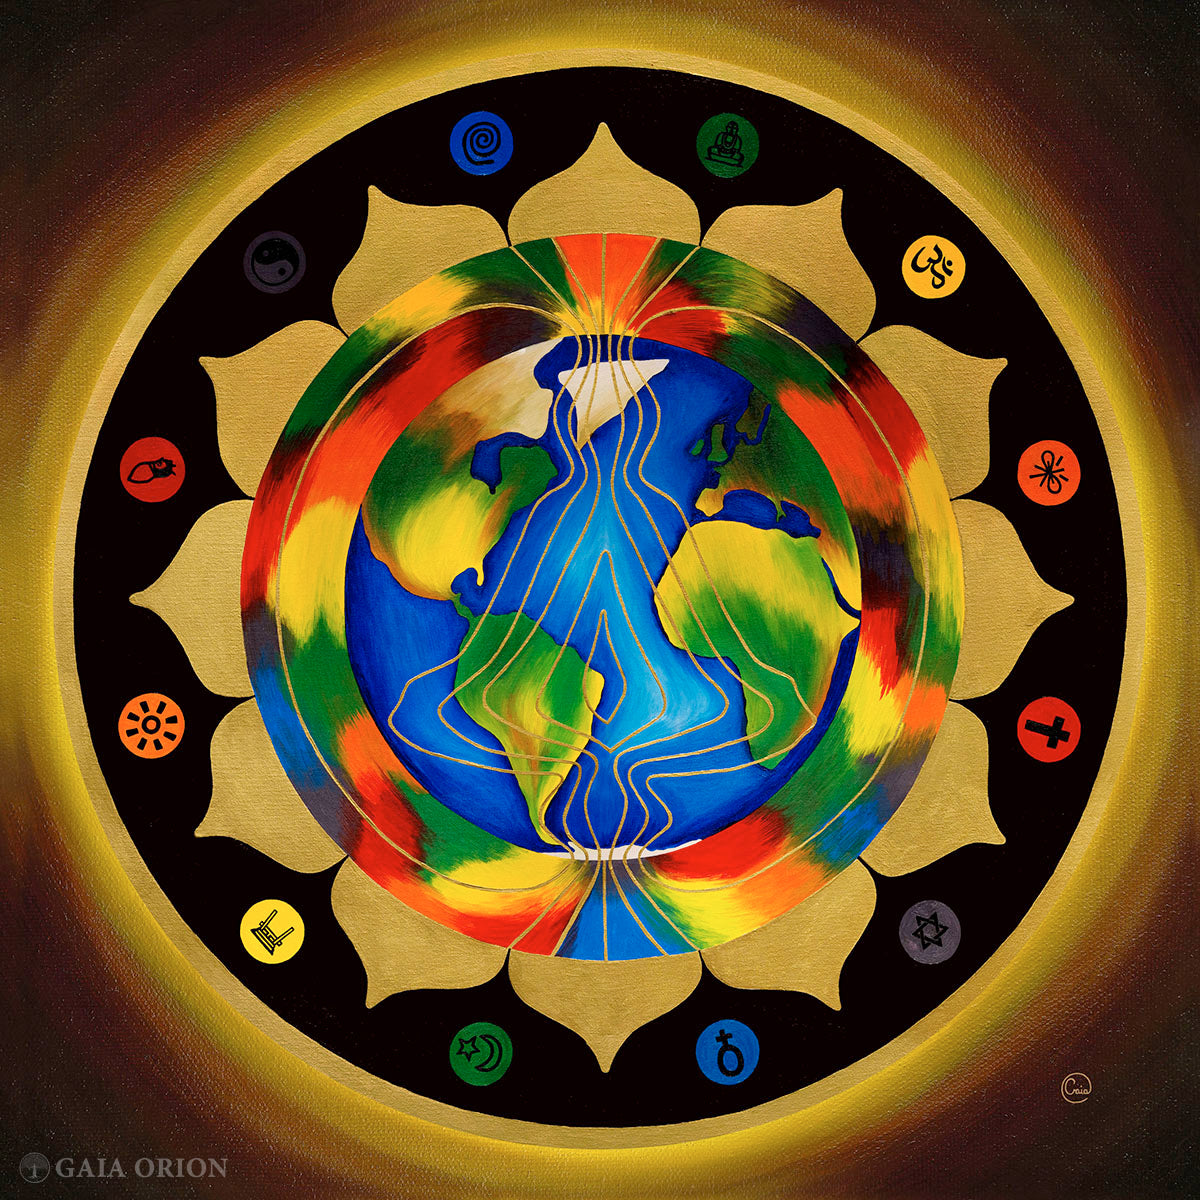 A mandala for peace on earth with symbols of all religions and a person meditating in the planet